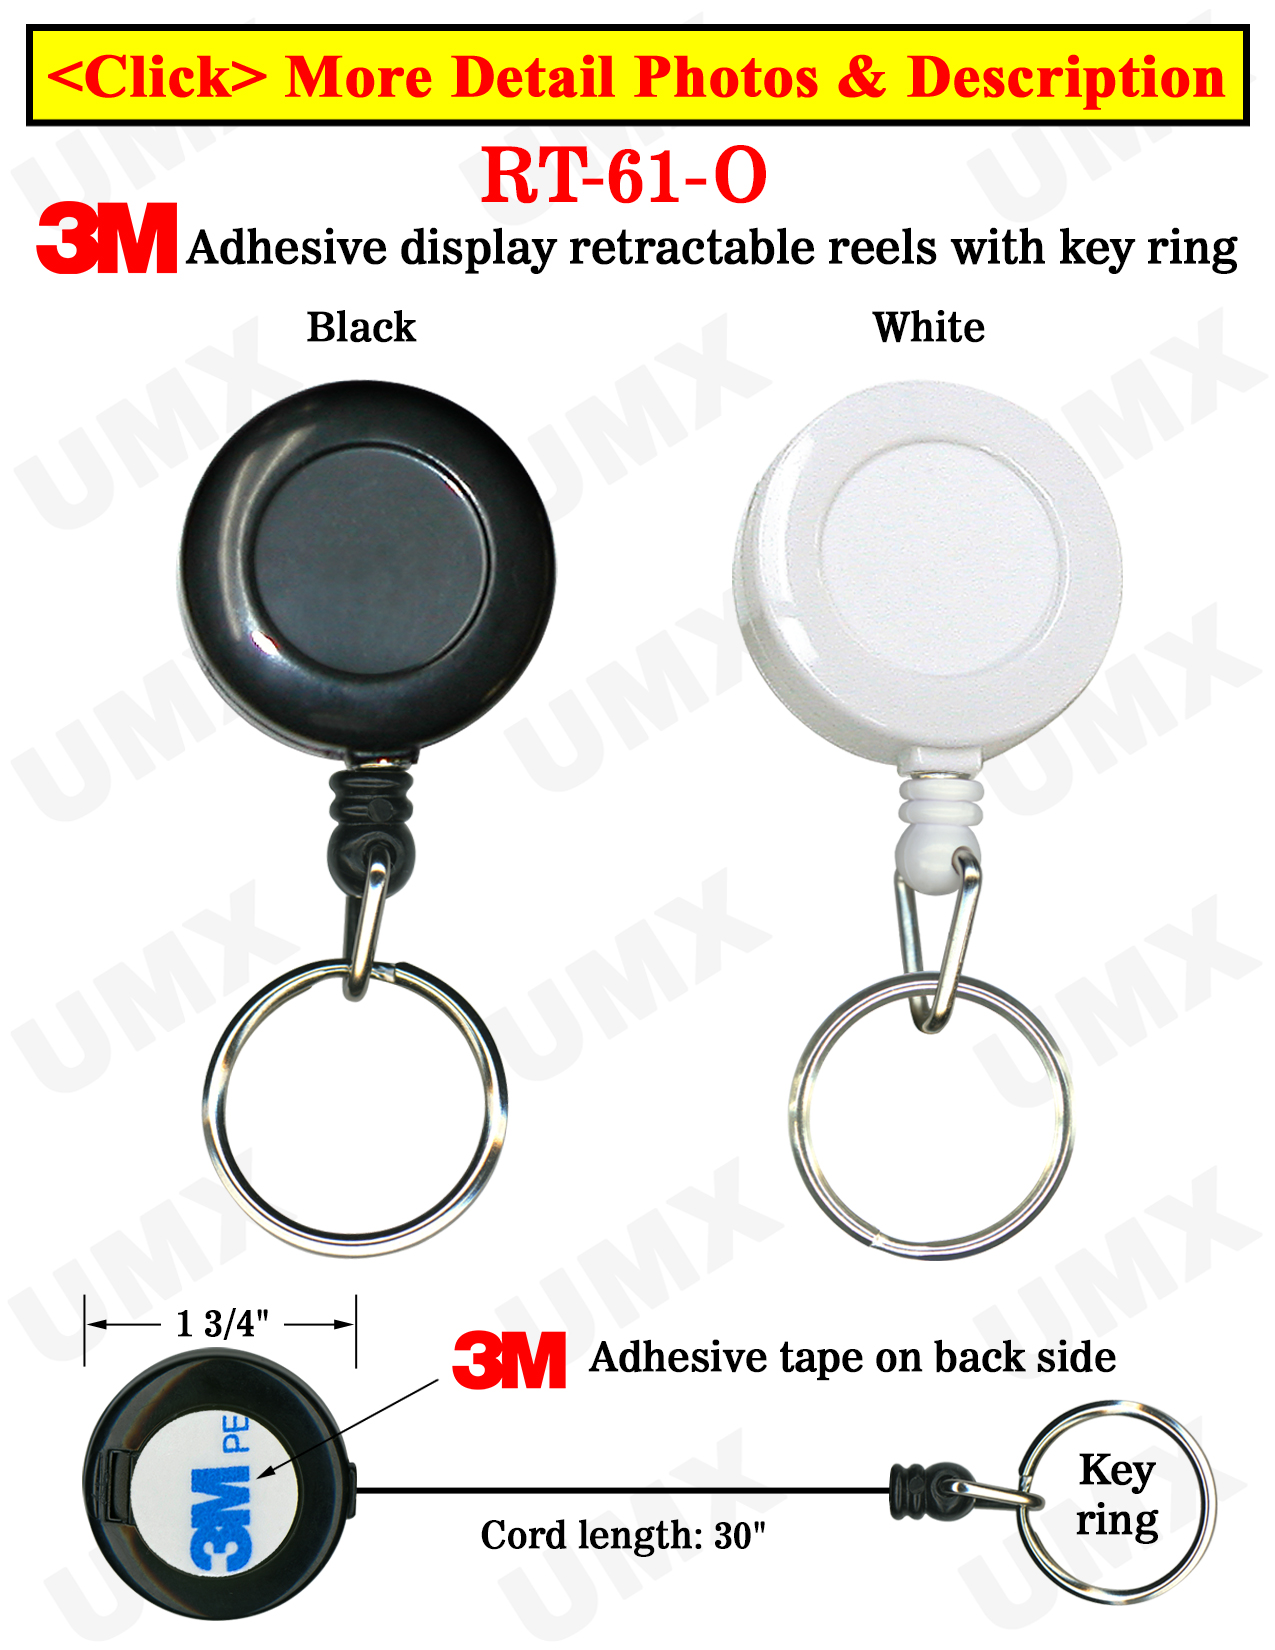 Low Cost Promotional Item Display Retractable Key Chain Reels With Metal Keychains and Adhesive Backing